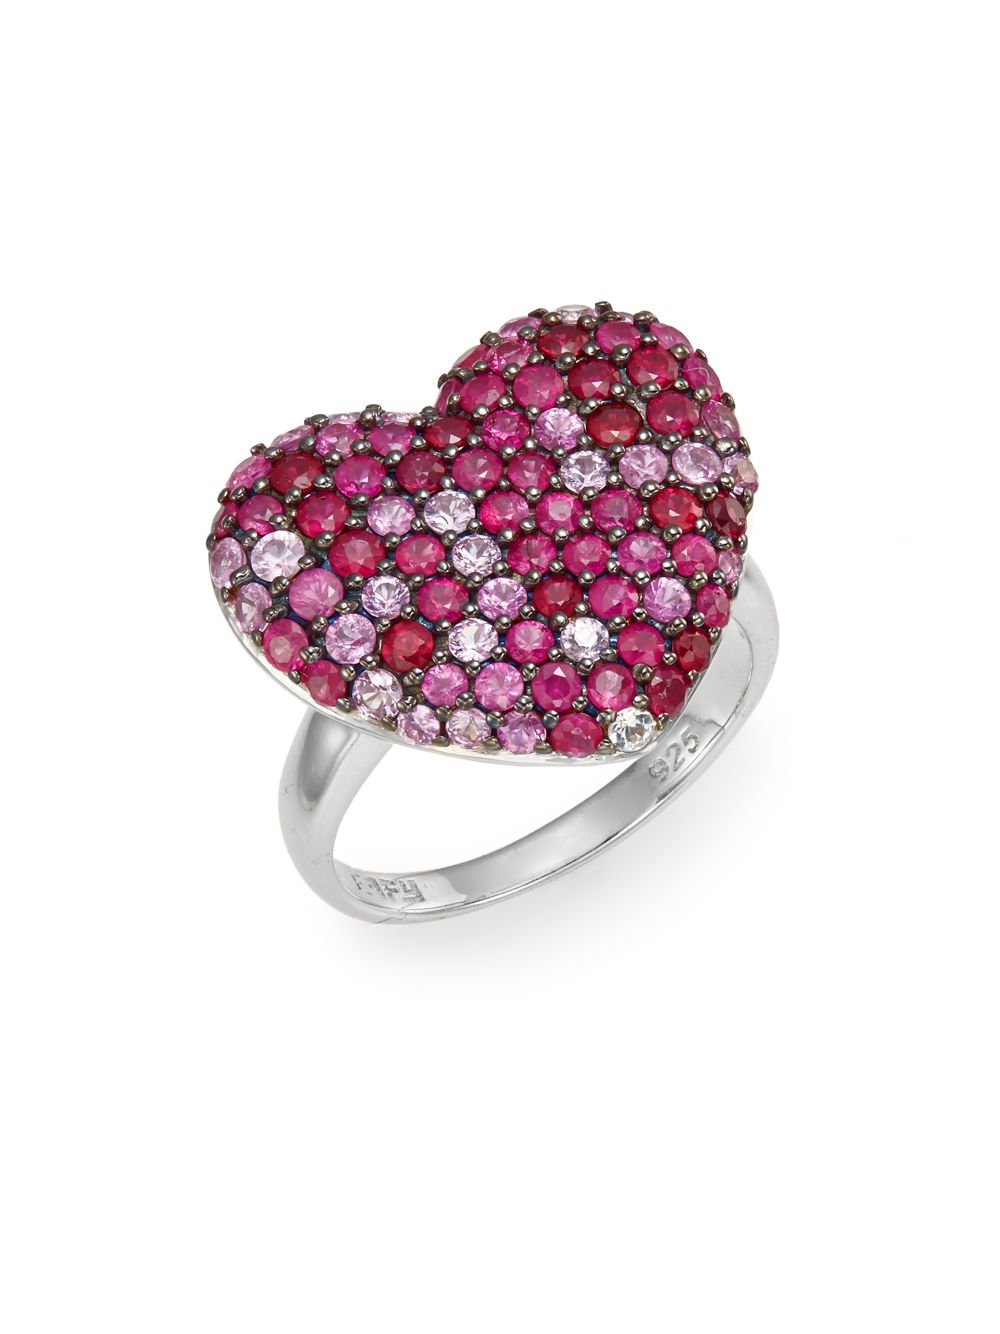 Lyst - Effy Ruby, Pink Sapphire & Sterling Silver Heart Ring in Pink